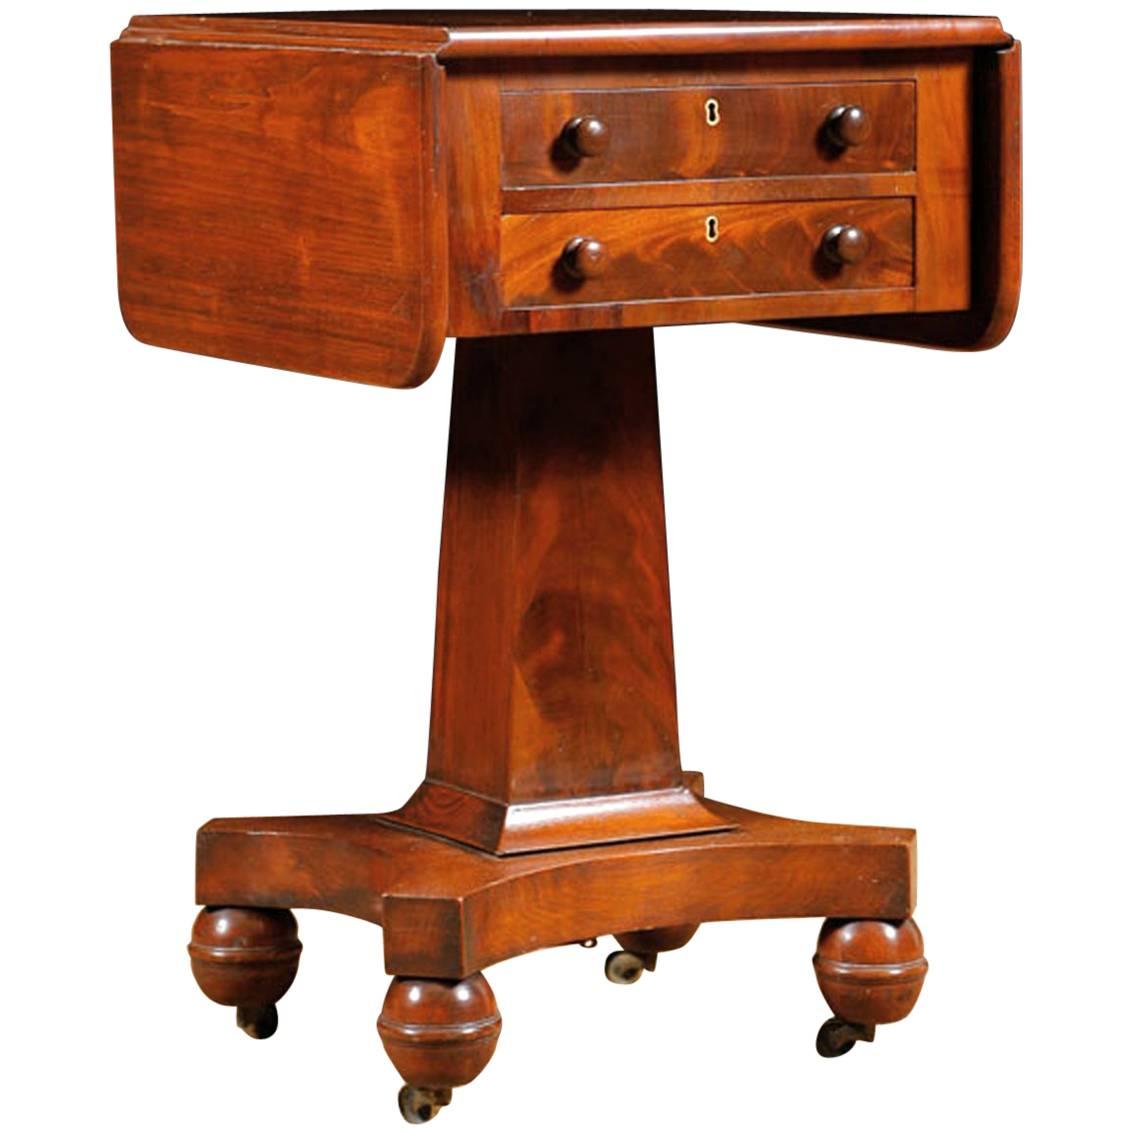 Antique American Empire Side Table with Pedestal Base in Mahogany, circa 1840